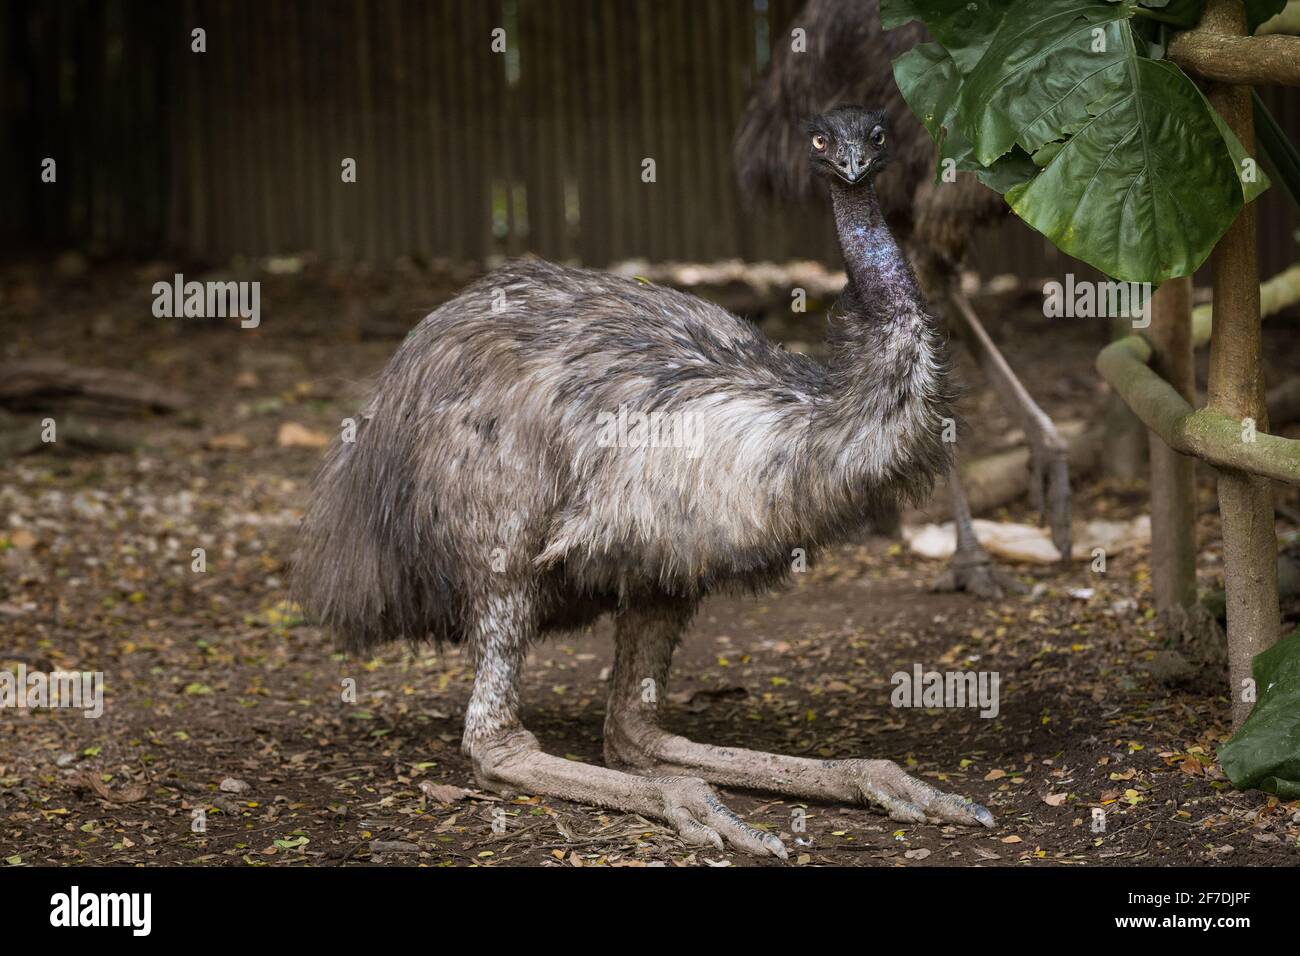 One emu looking at the camera. The emu (Dromaius novaehollandiae) is the second-largest living bird by height, after its relative, the ostrich. Stock Photo